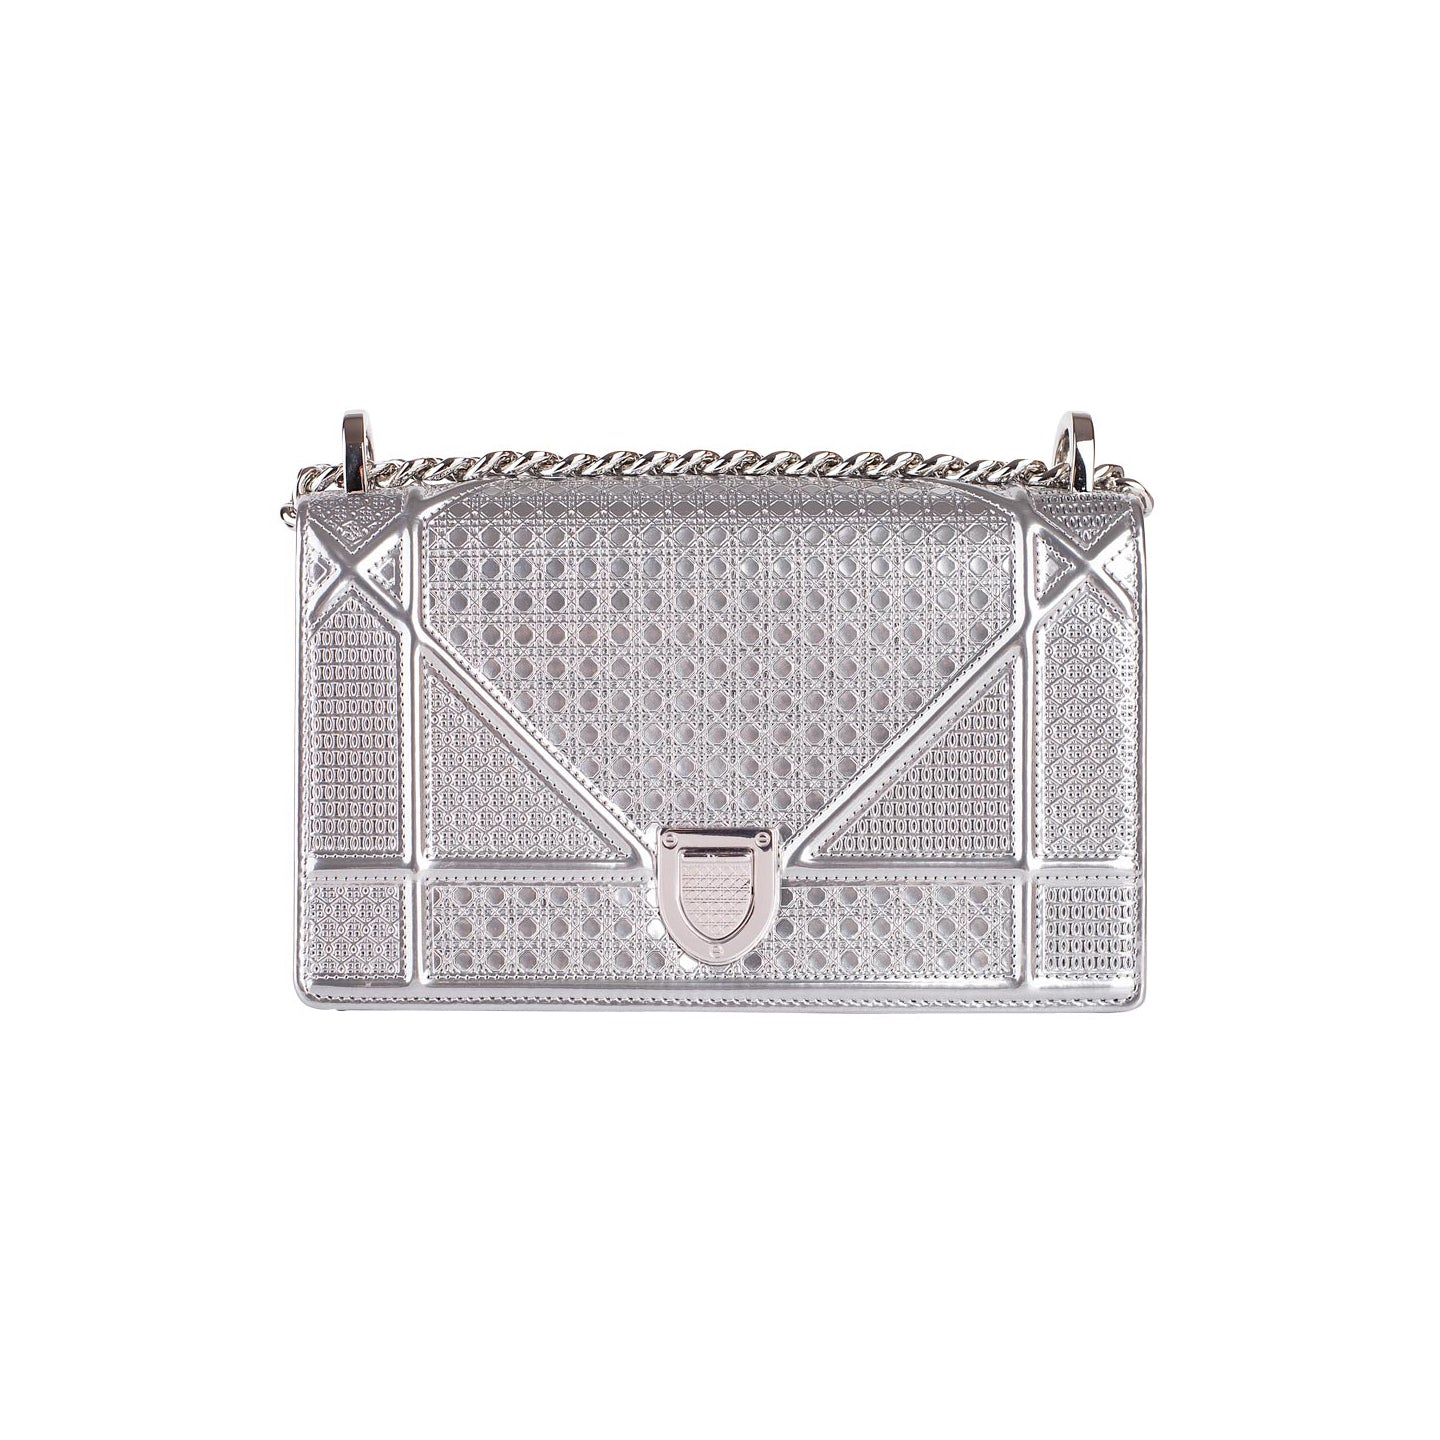 Lady Dior Micro Bag Iridescent Silver  Kaialux